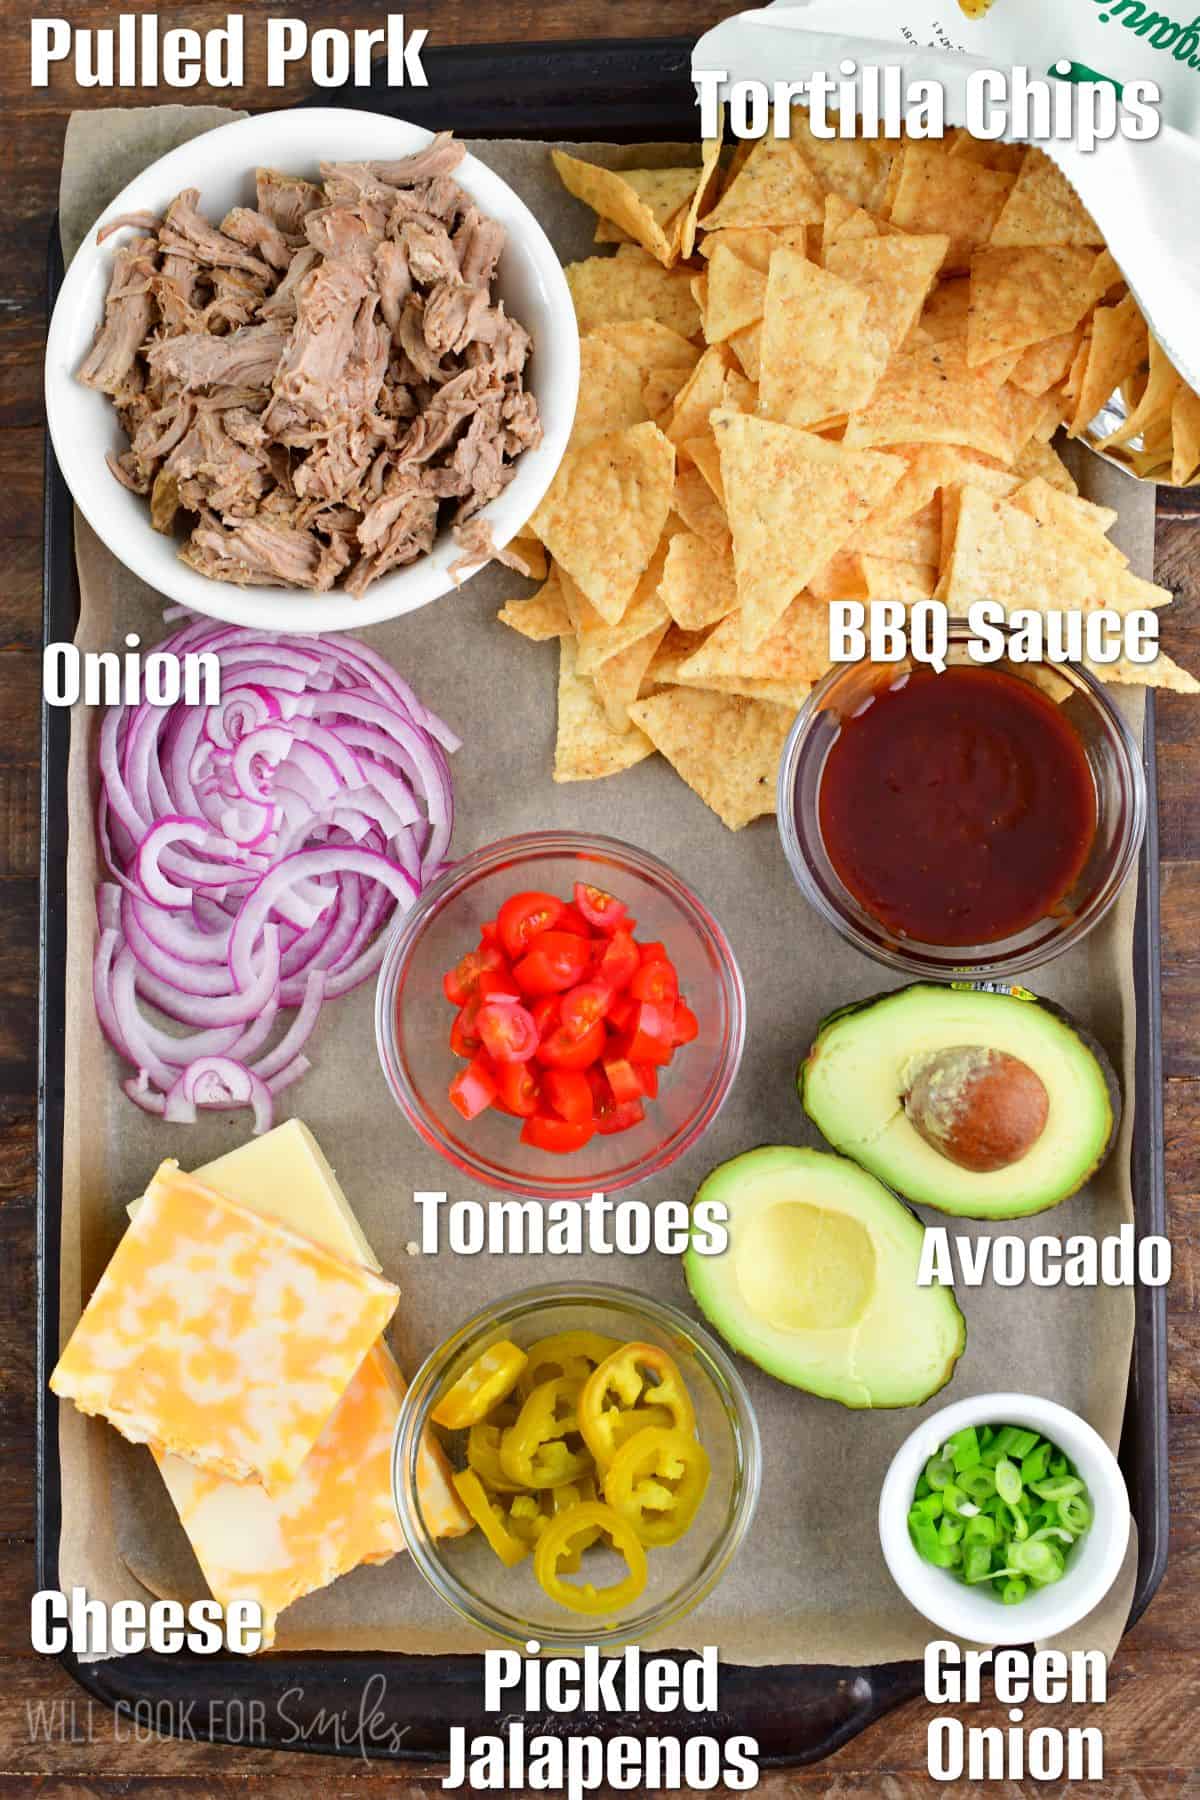 labeled ingredients for pulled pork nachos on a baking sheet.